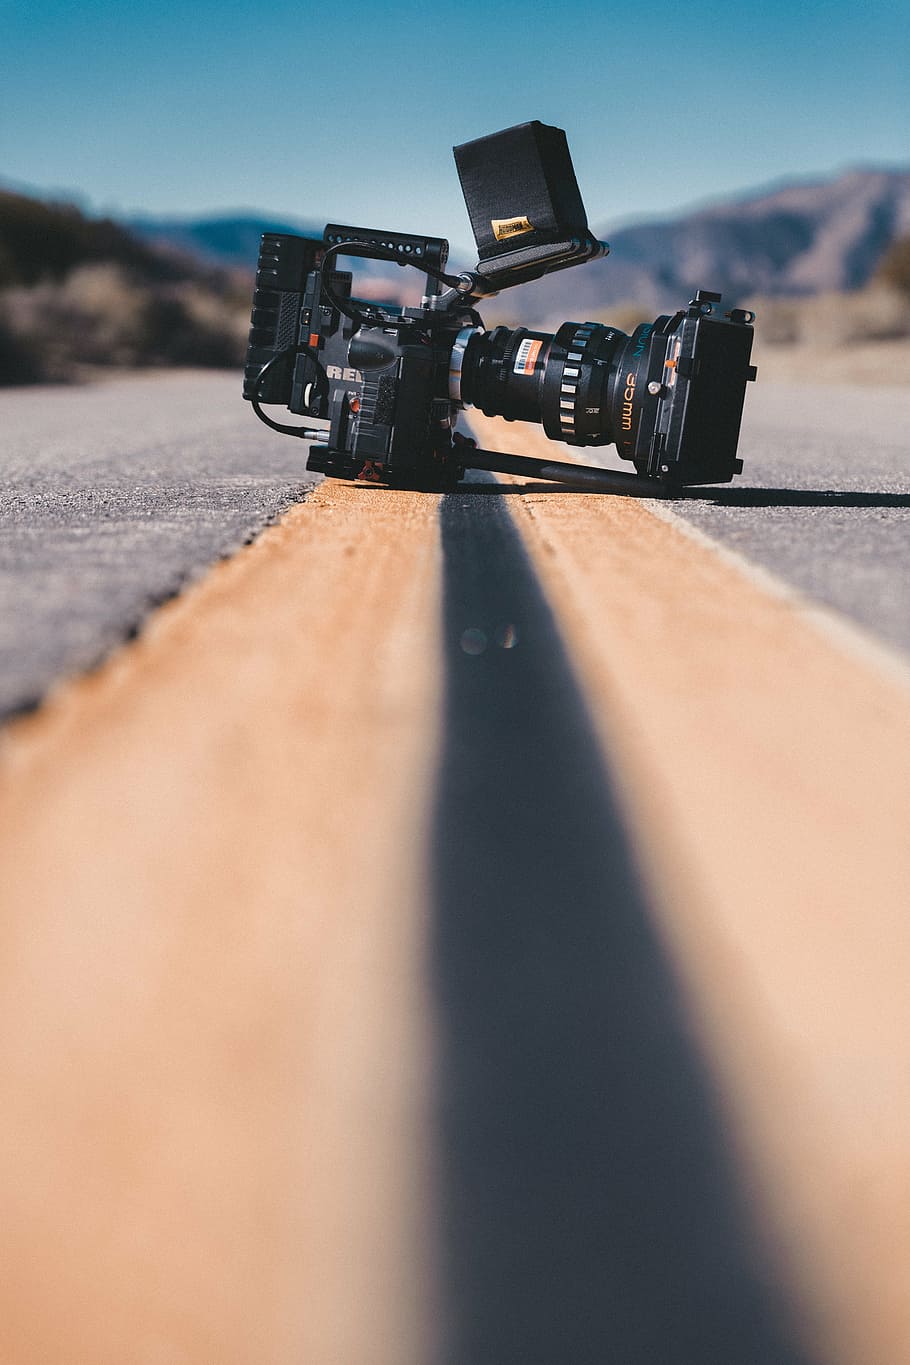 black, video recorder, road, red, camera, video, street, nature, production, desert